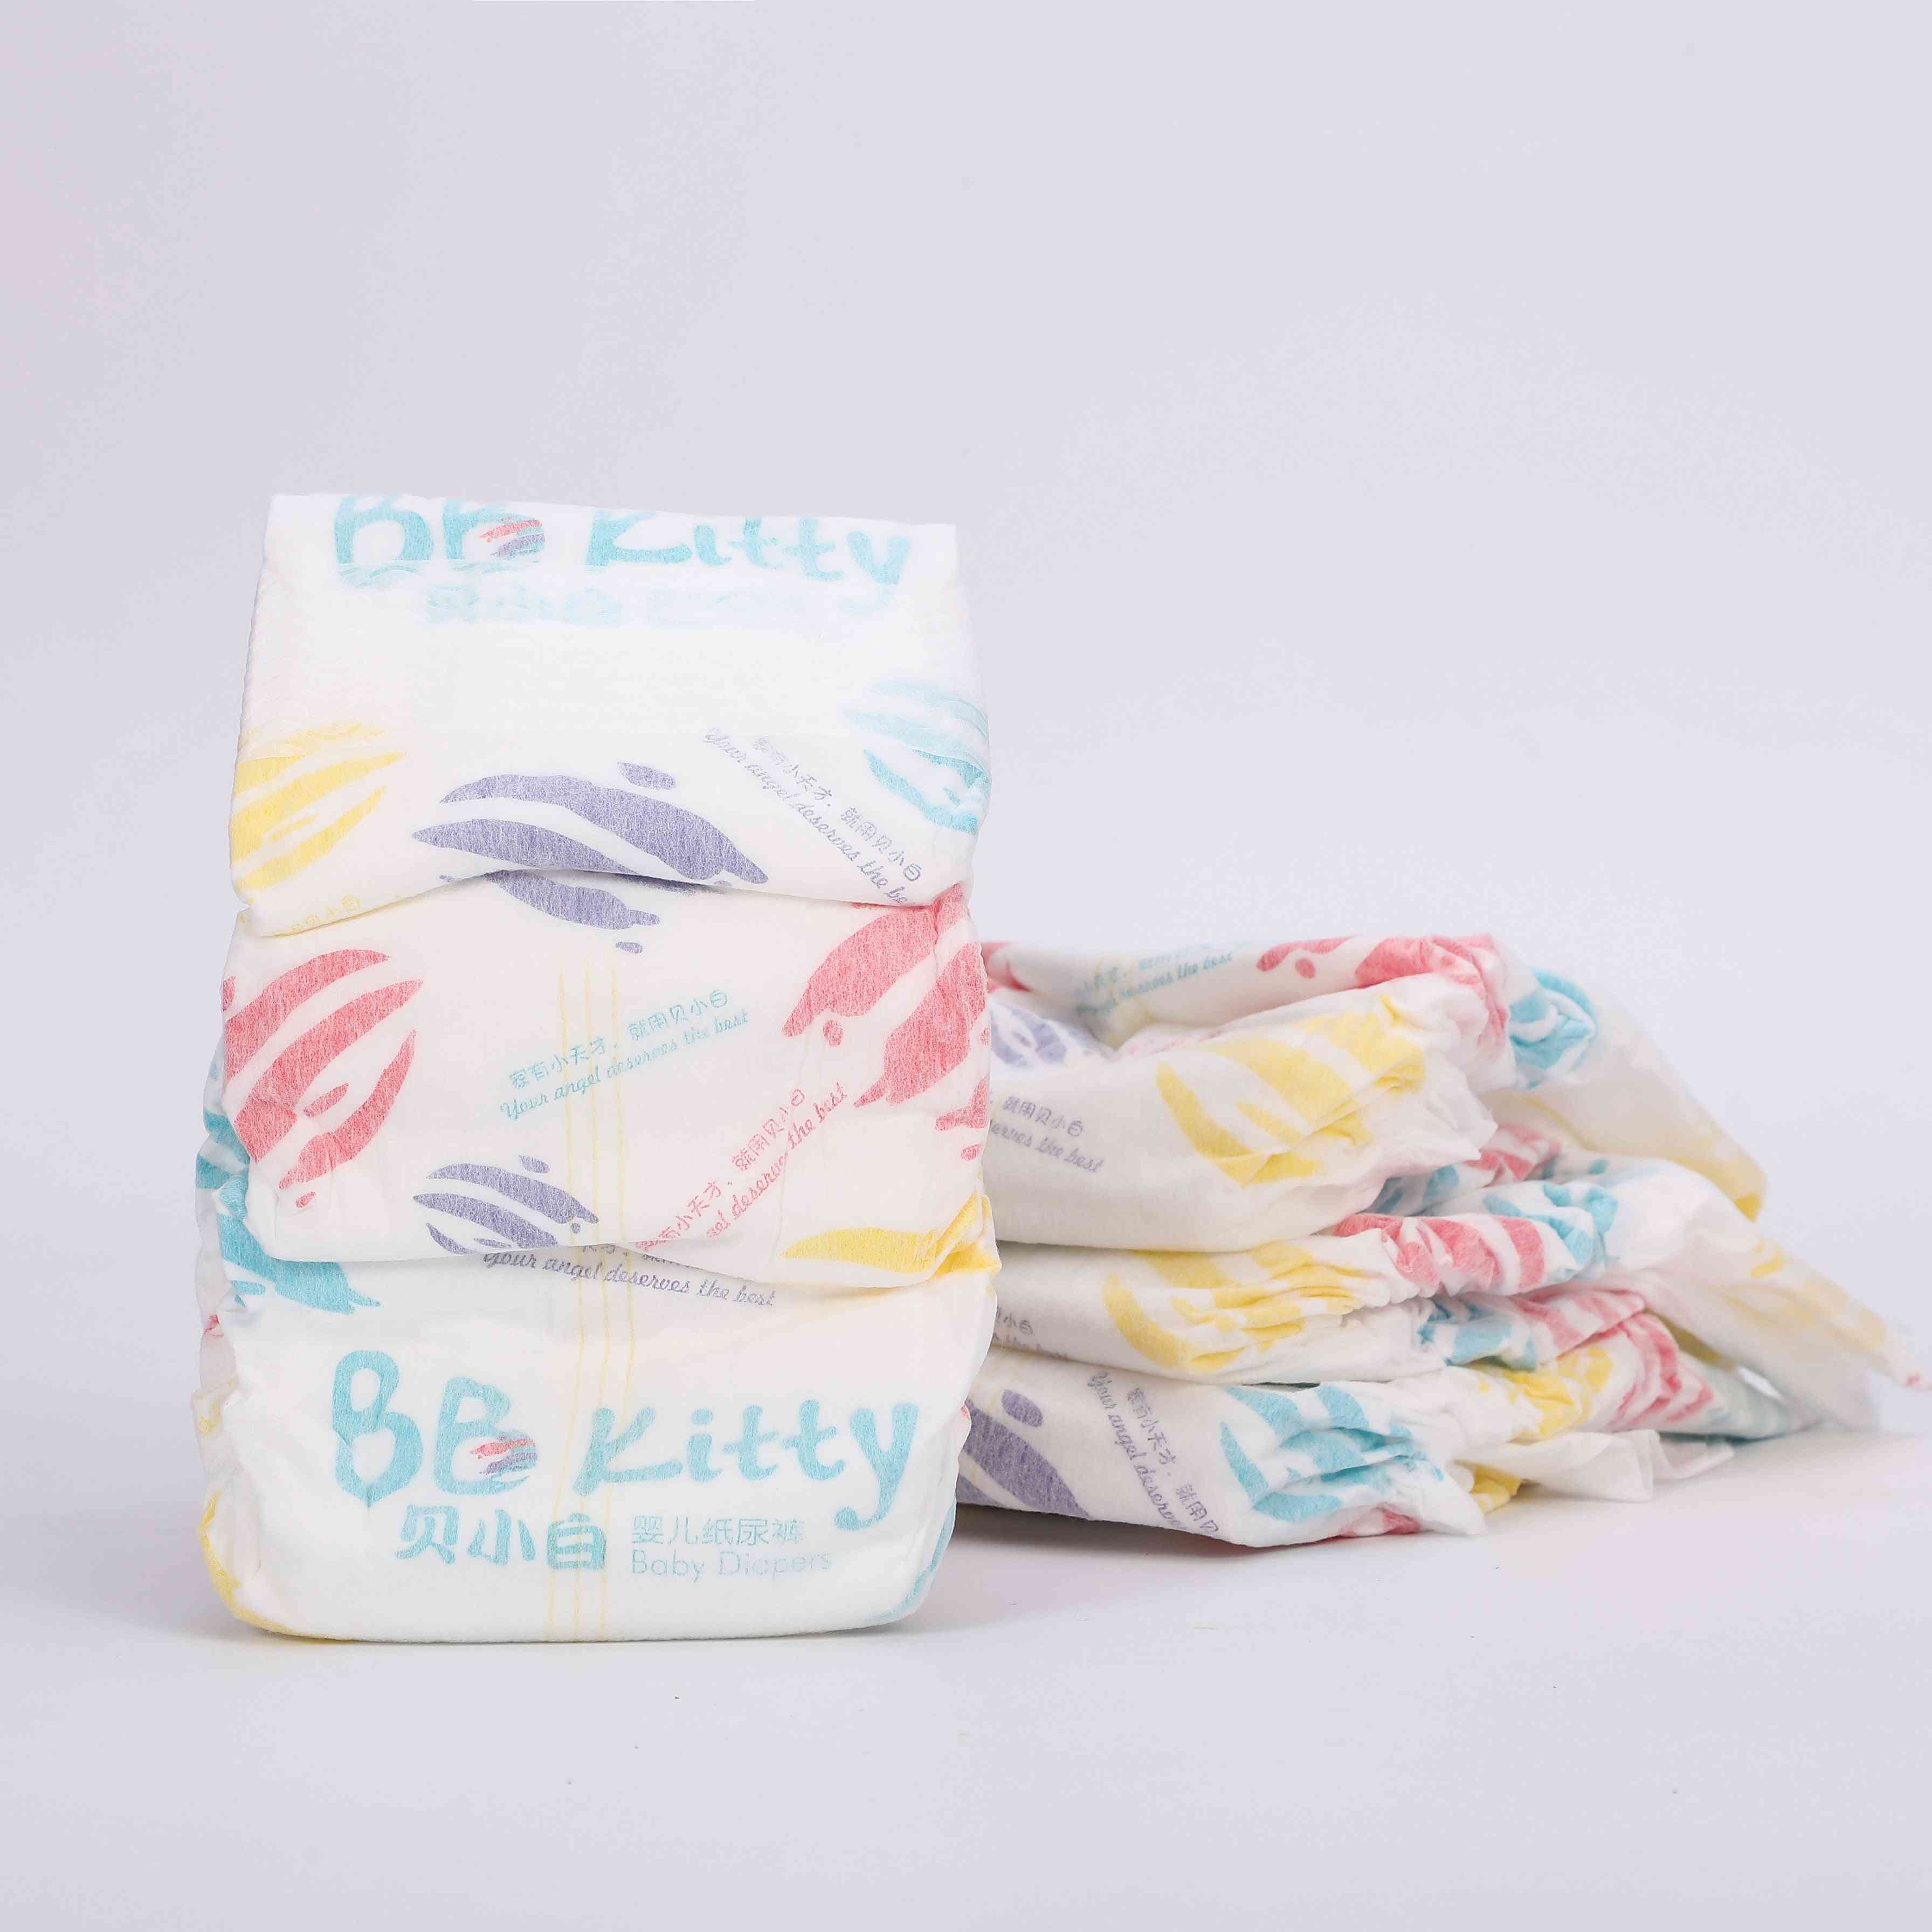 Hight Quality Breathe Freely Baby Diaper